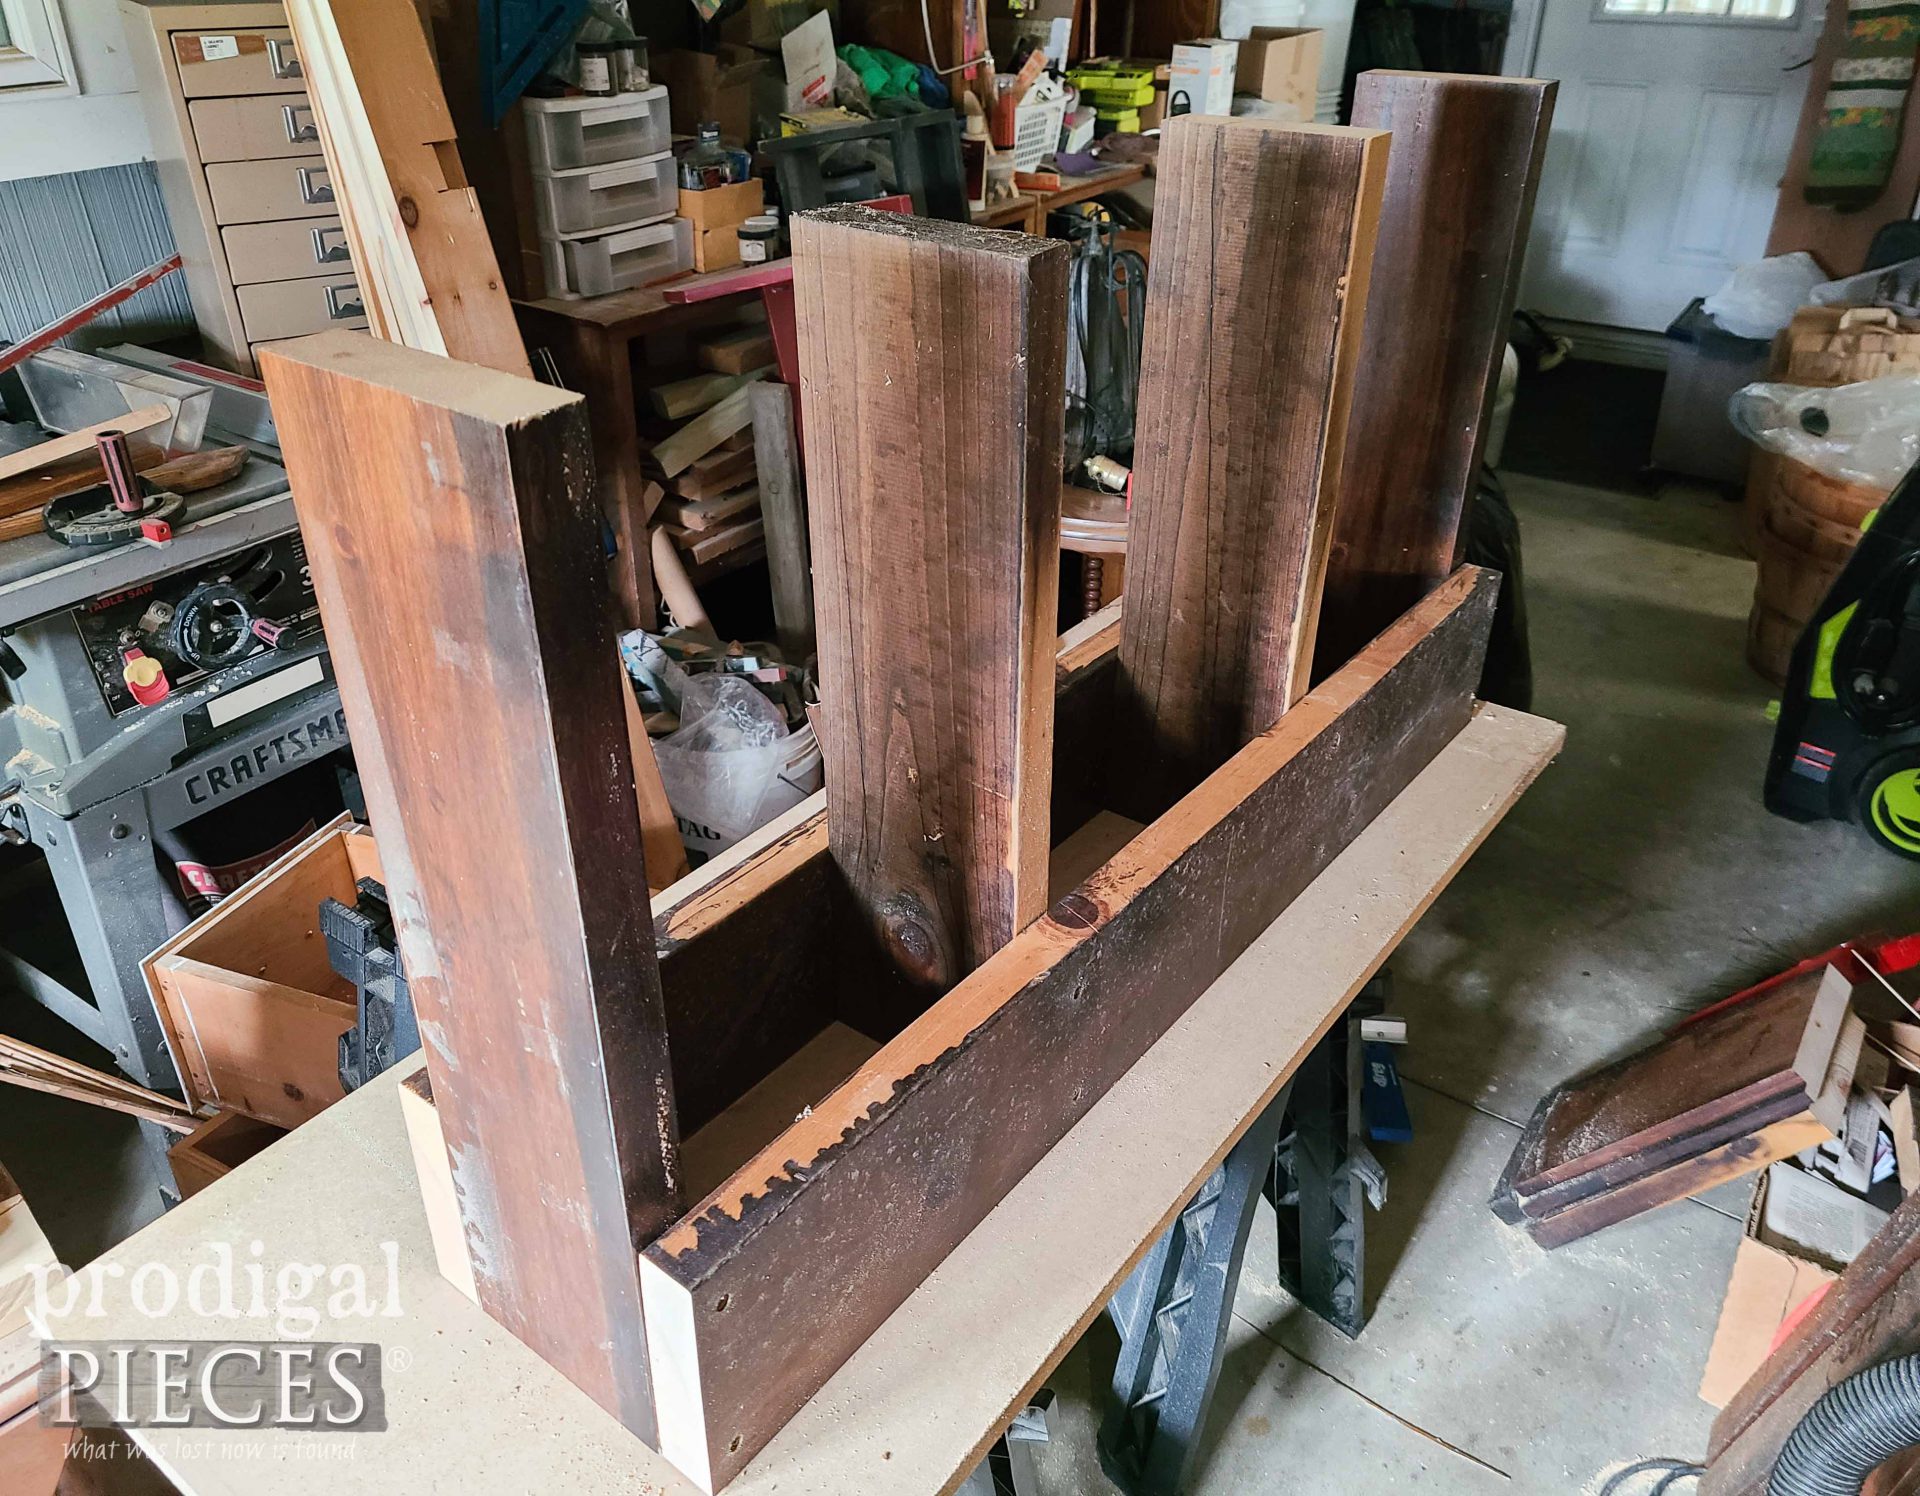 Building DIY Weight Rack from Reclaimed Wood for Fit Over 40 | prodigalpieces.com #prodigalpieces